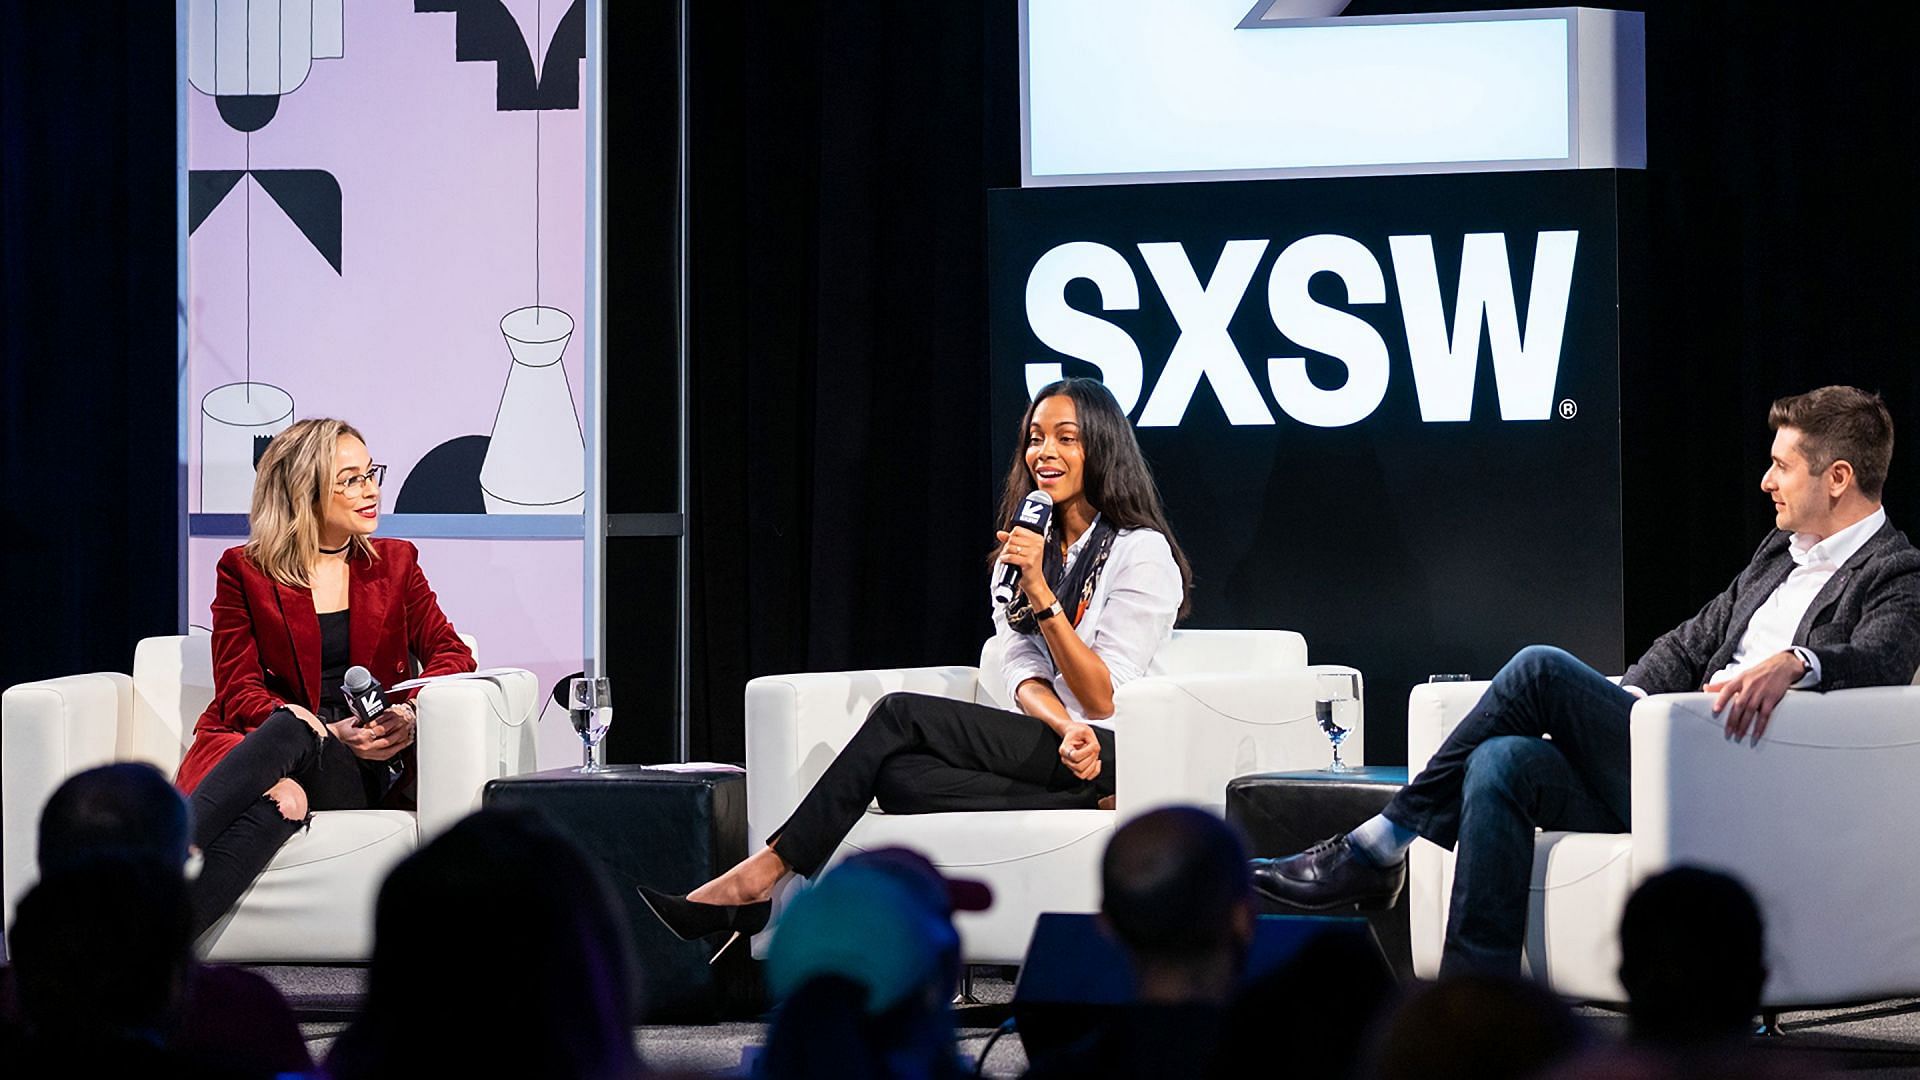 South by Southwest will take place in Austin, Texas (image via South by Southwest)